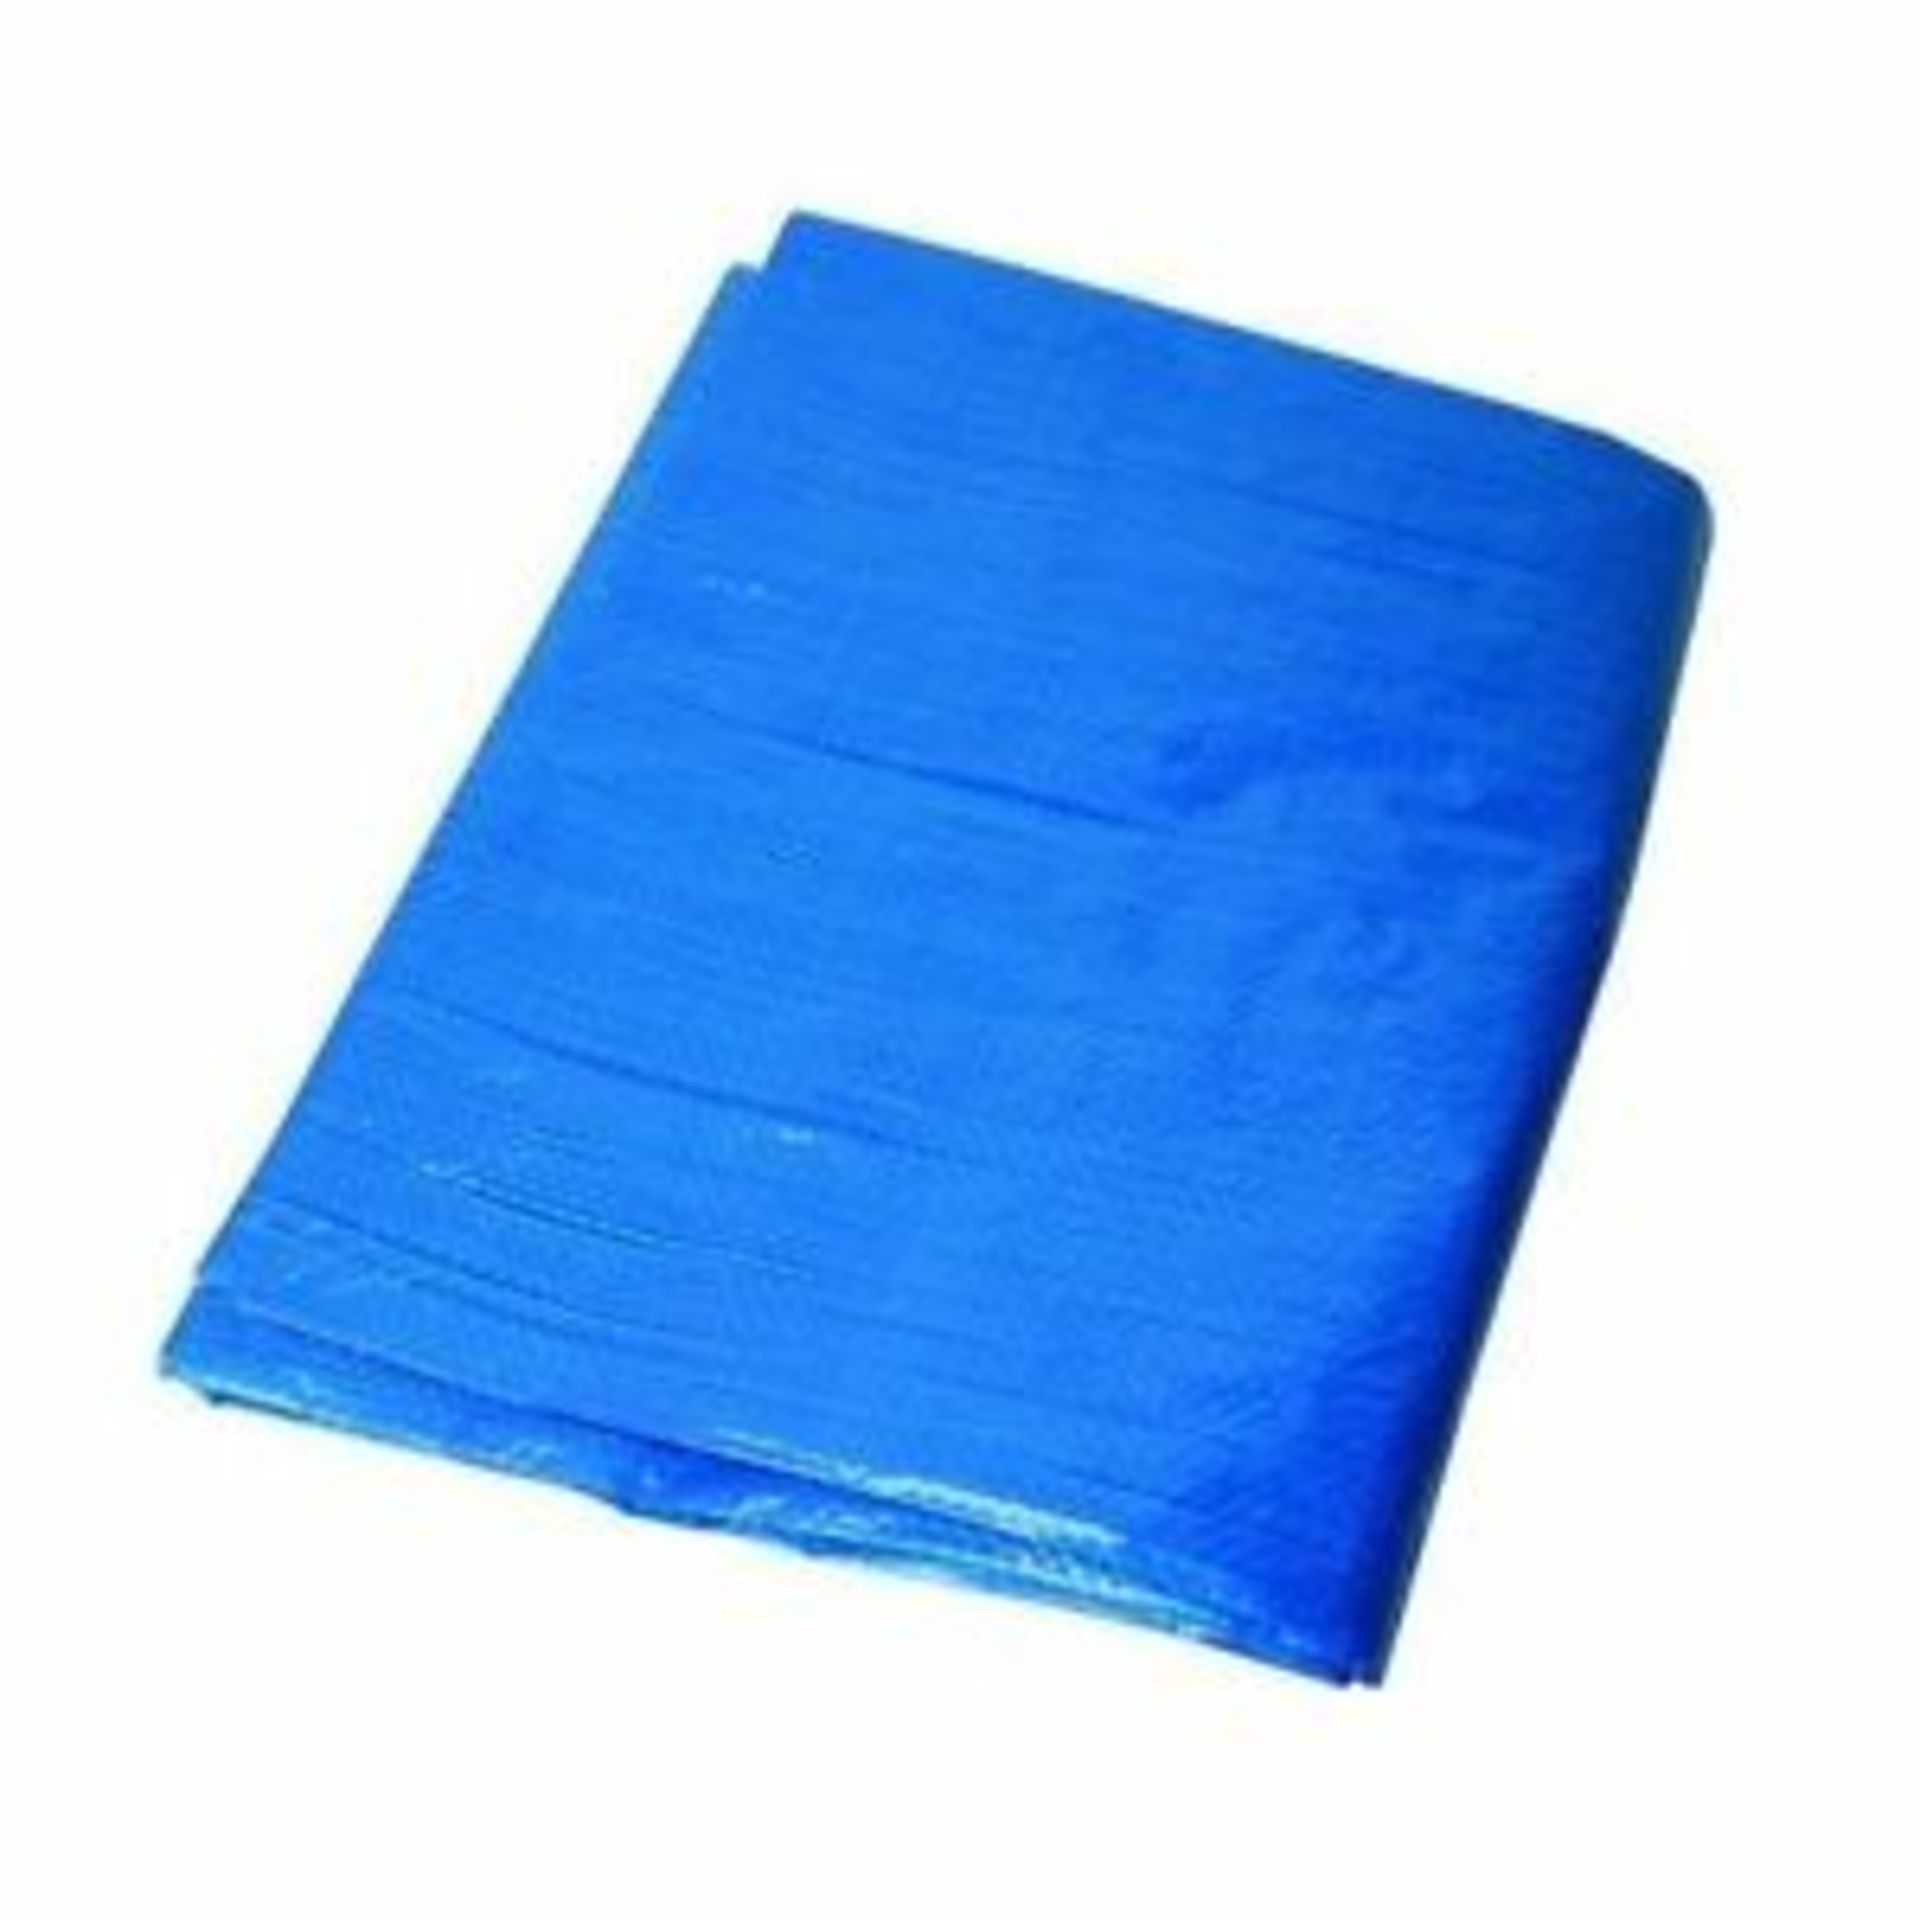 V *TRADE QTY* Brand New 12 x 8ft Blue Tarpaulin X 4 YOUR BID PRICE TO BE MULTIPLIED BY FOUR